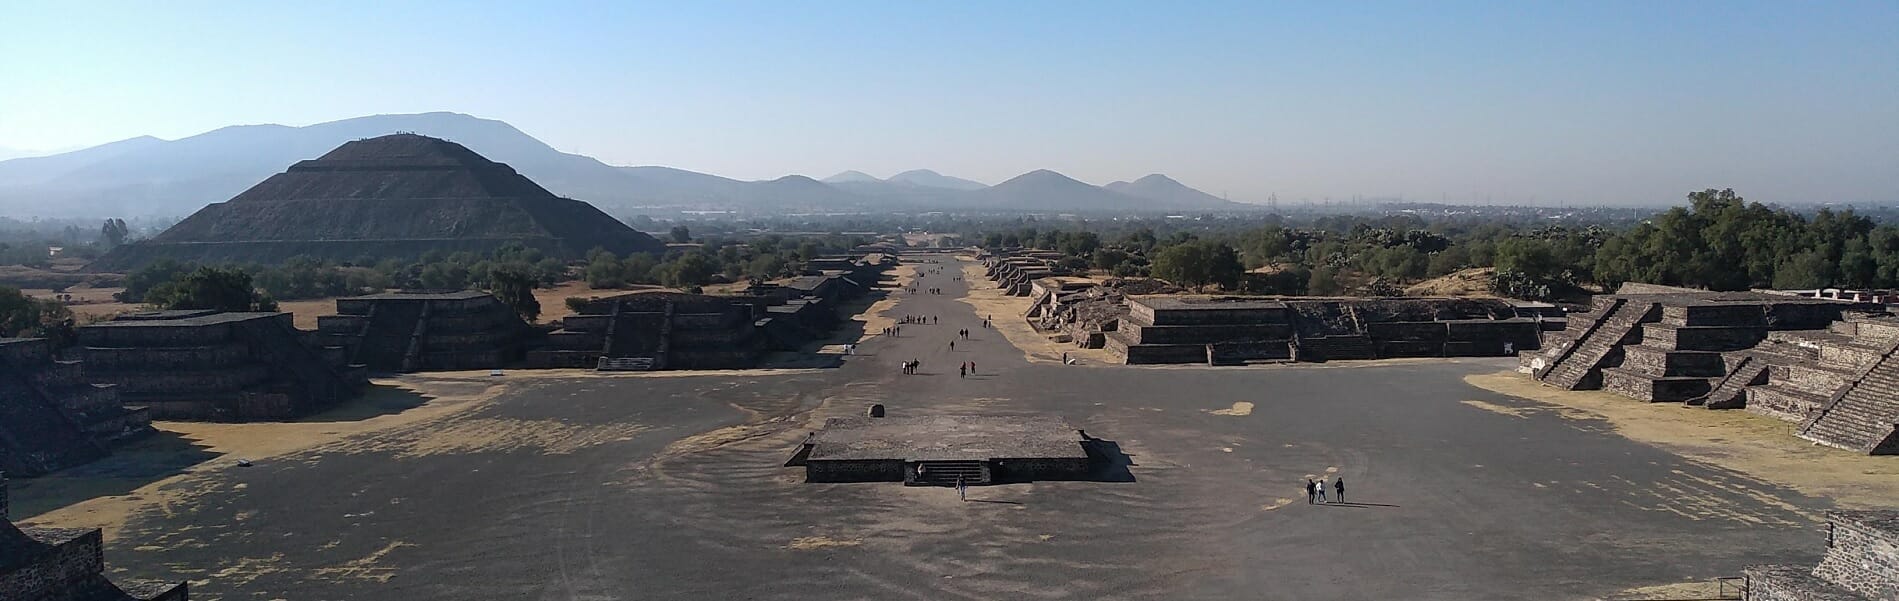 View of the Teotihuacan ruins